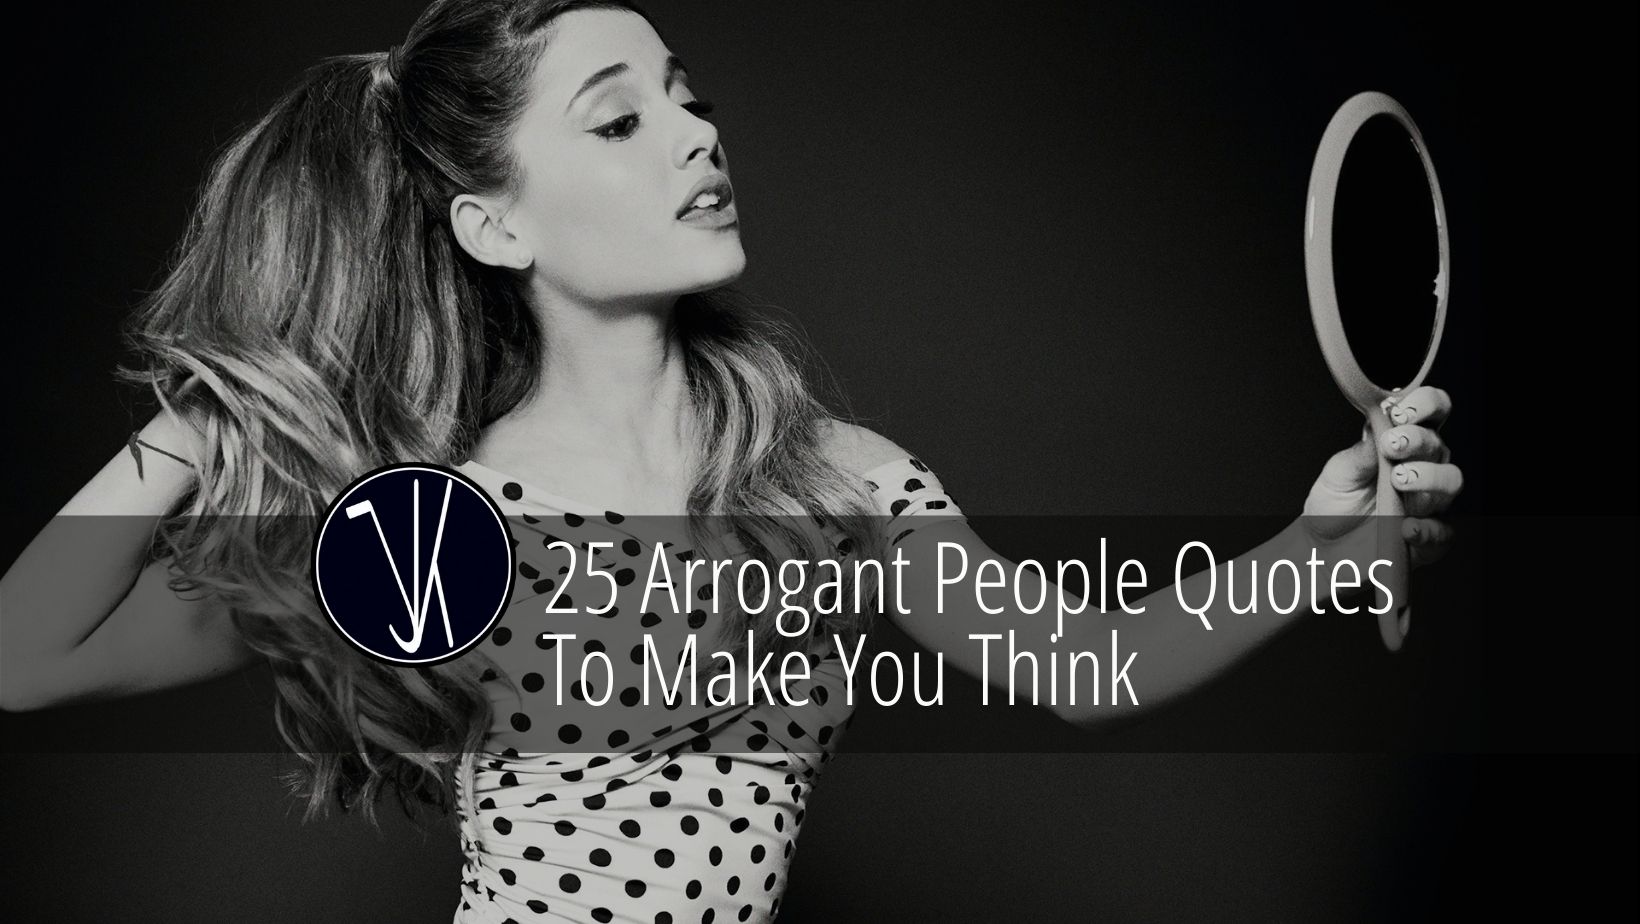 25 Arrogant People Quotes to Make You Think - Mr. Jk Quotes